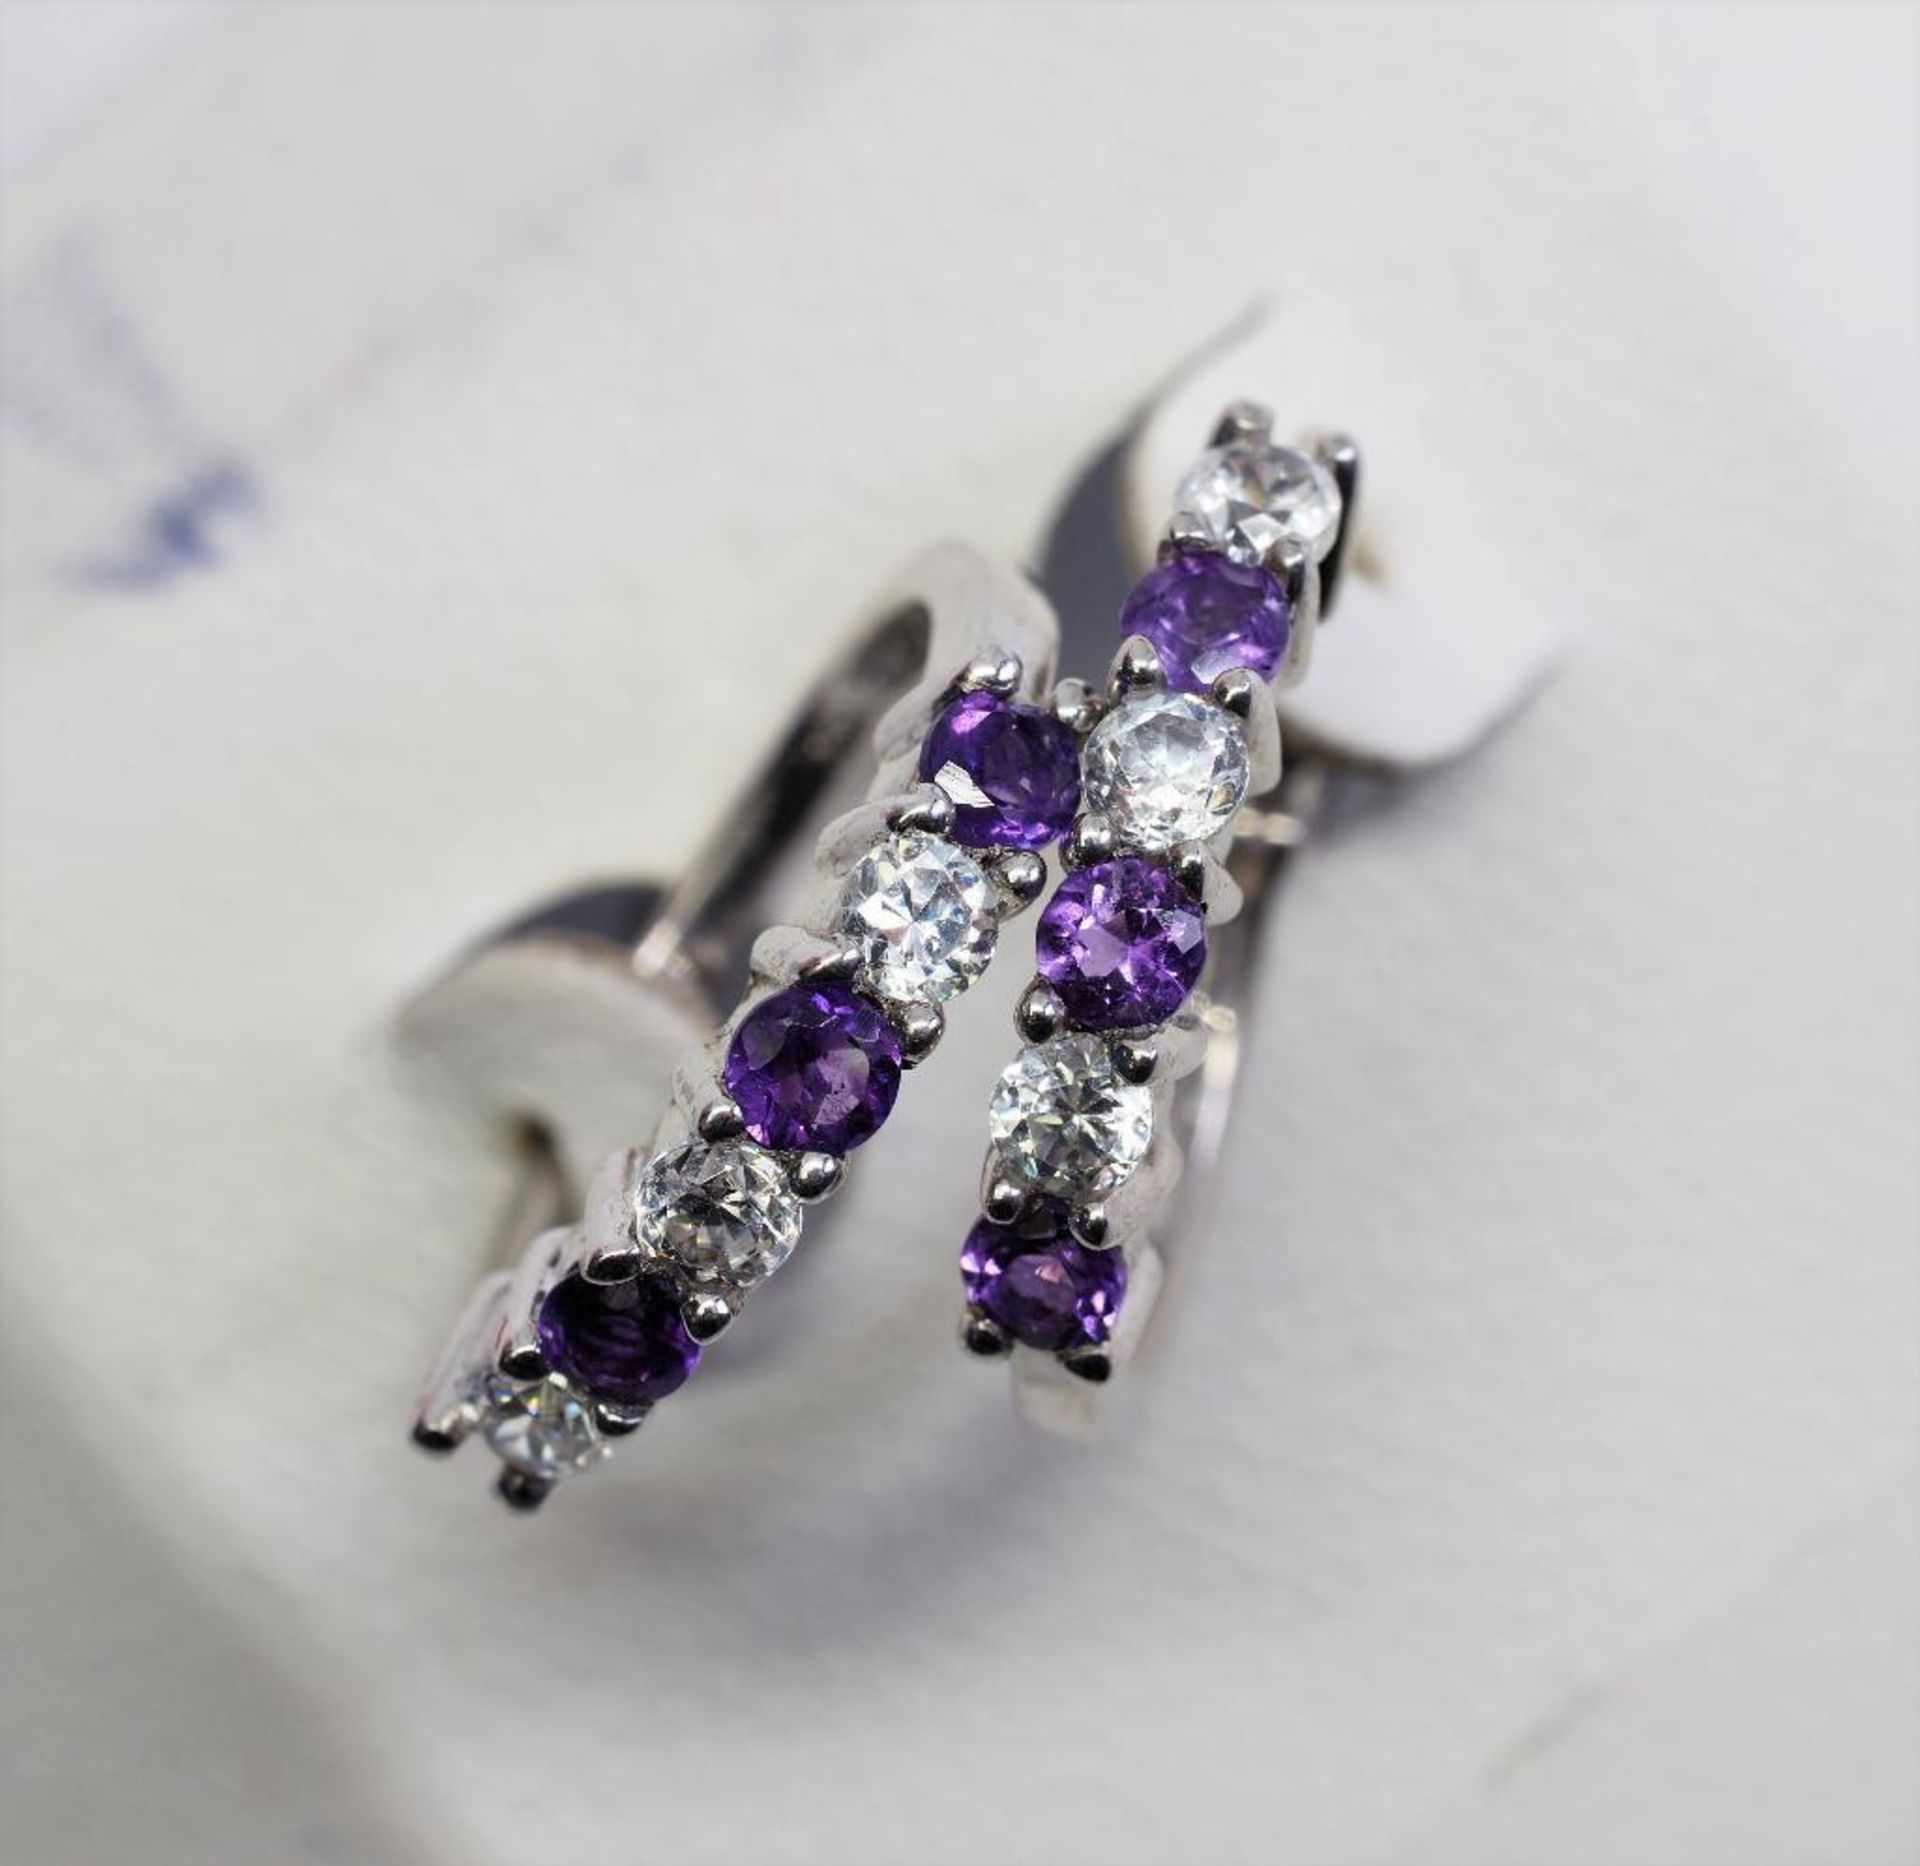 Sterling Silver Earrings With Genuine Amethyst, Retail $100 - Image 2 of 3